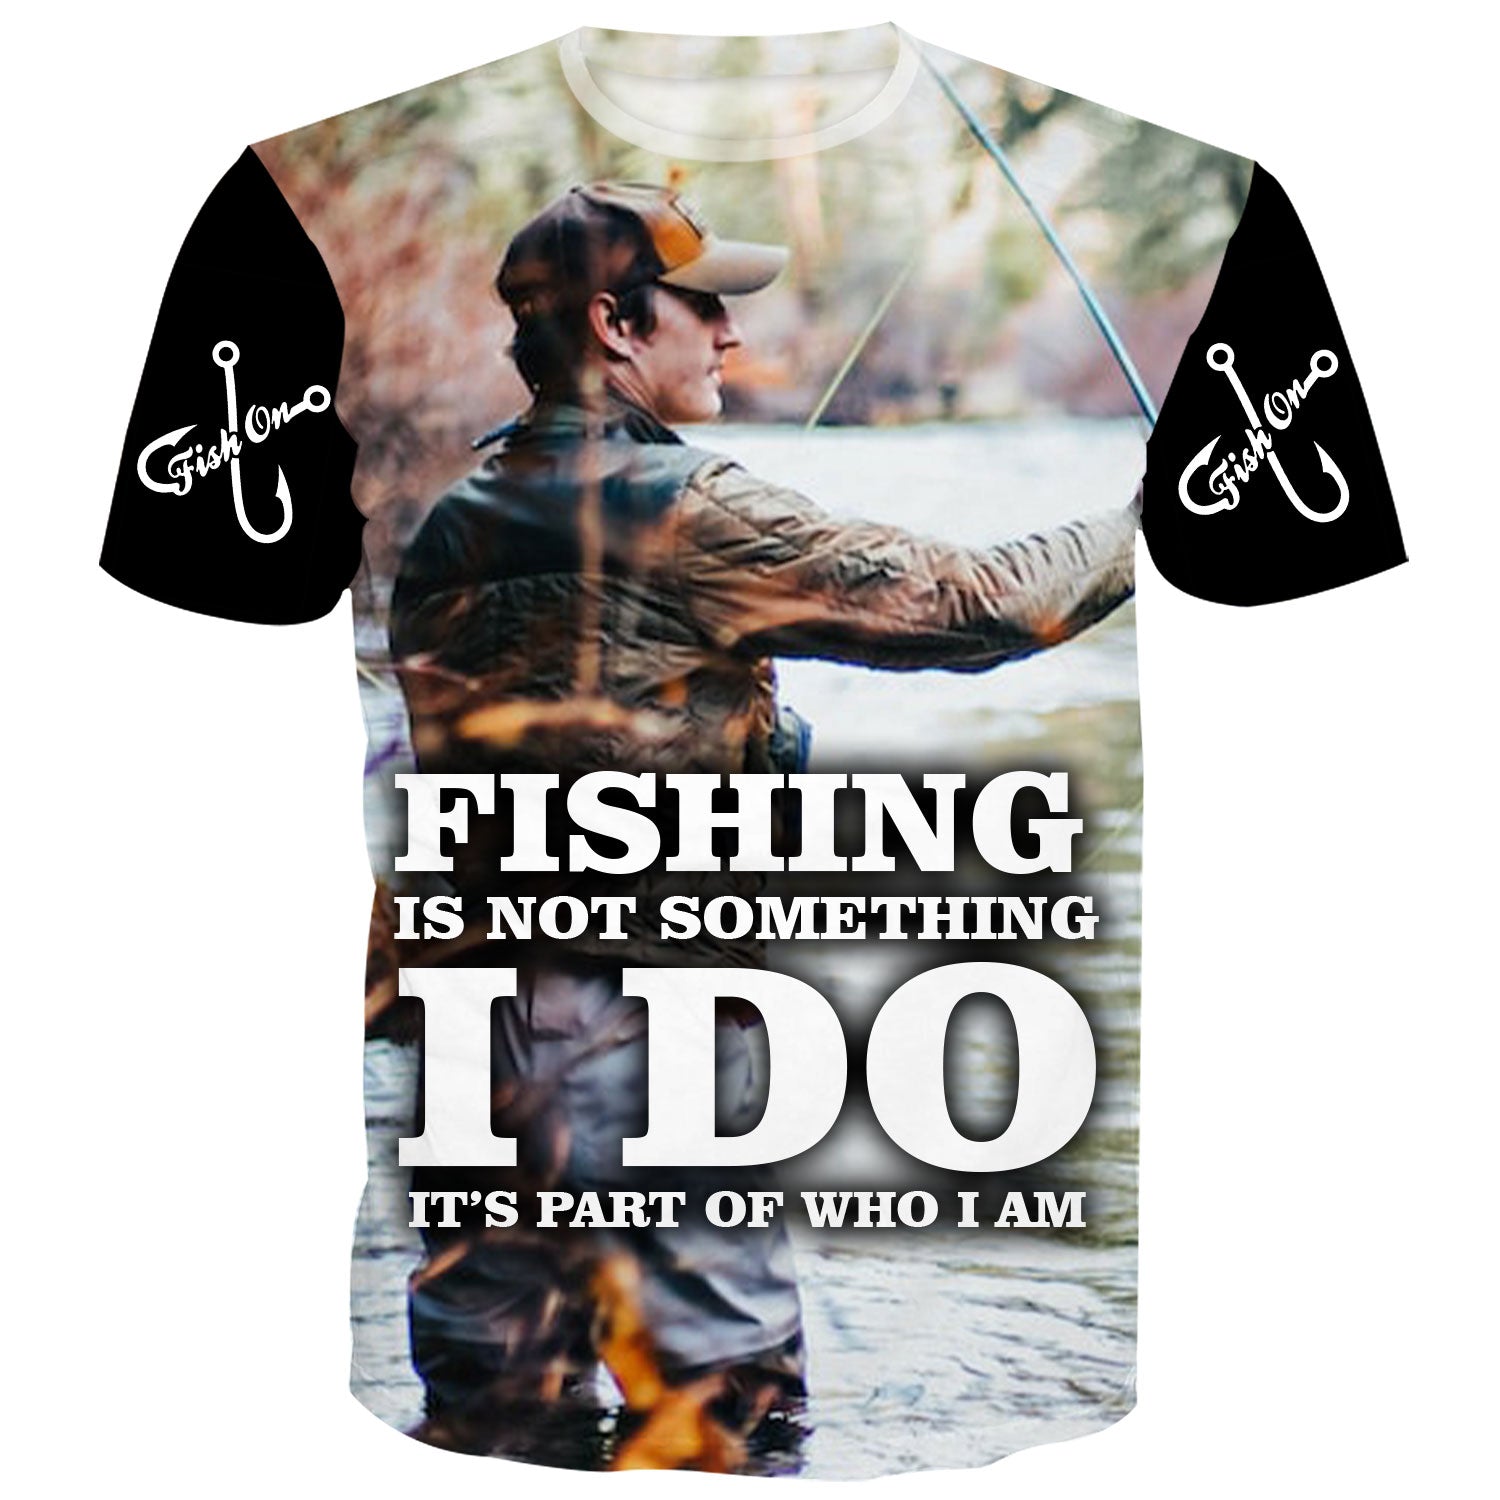 Fishing is a part of who I am - T-Shirt